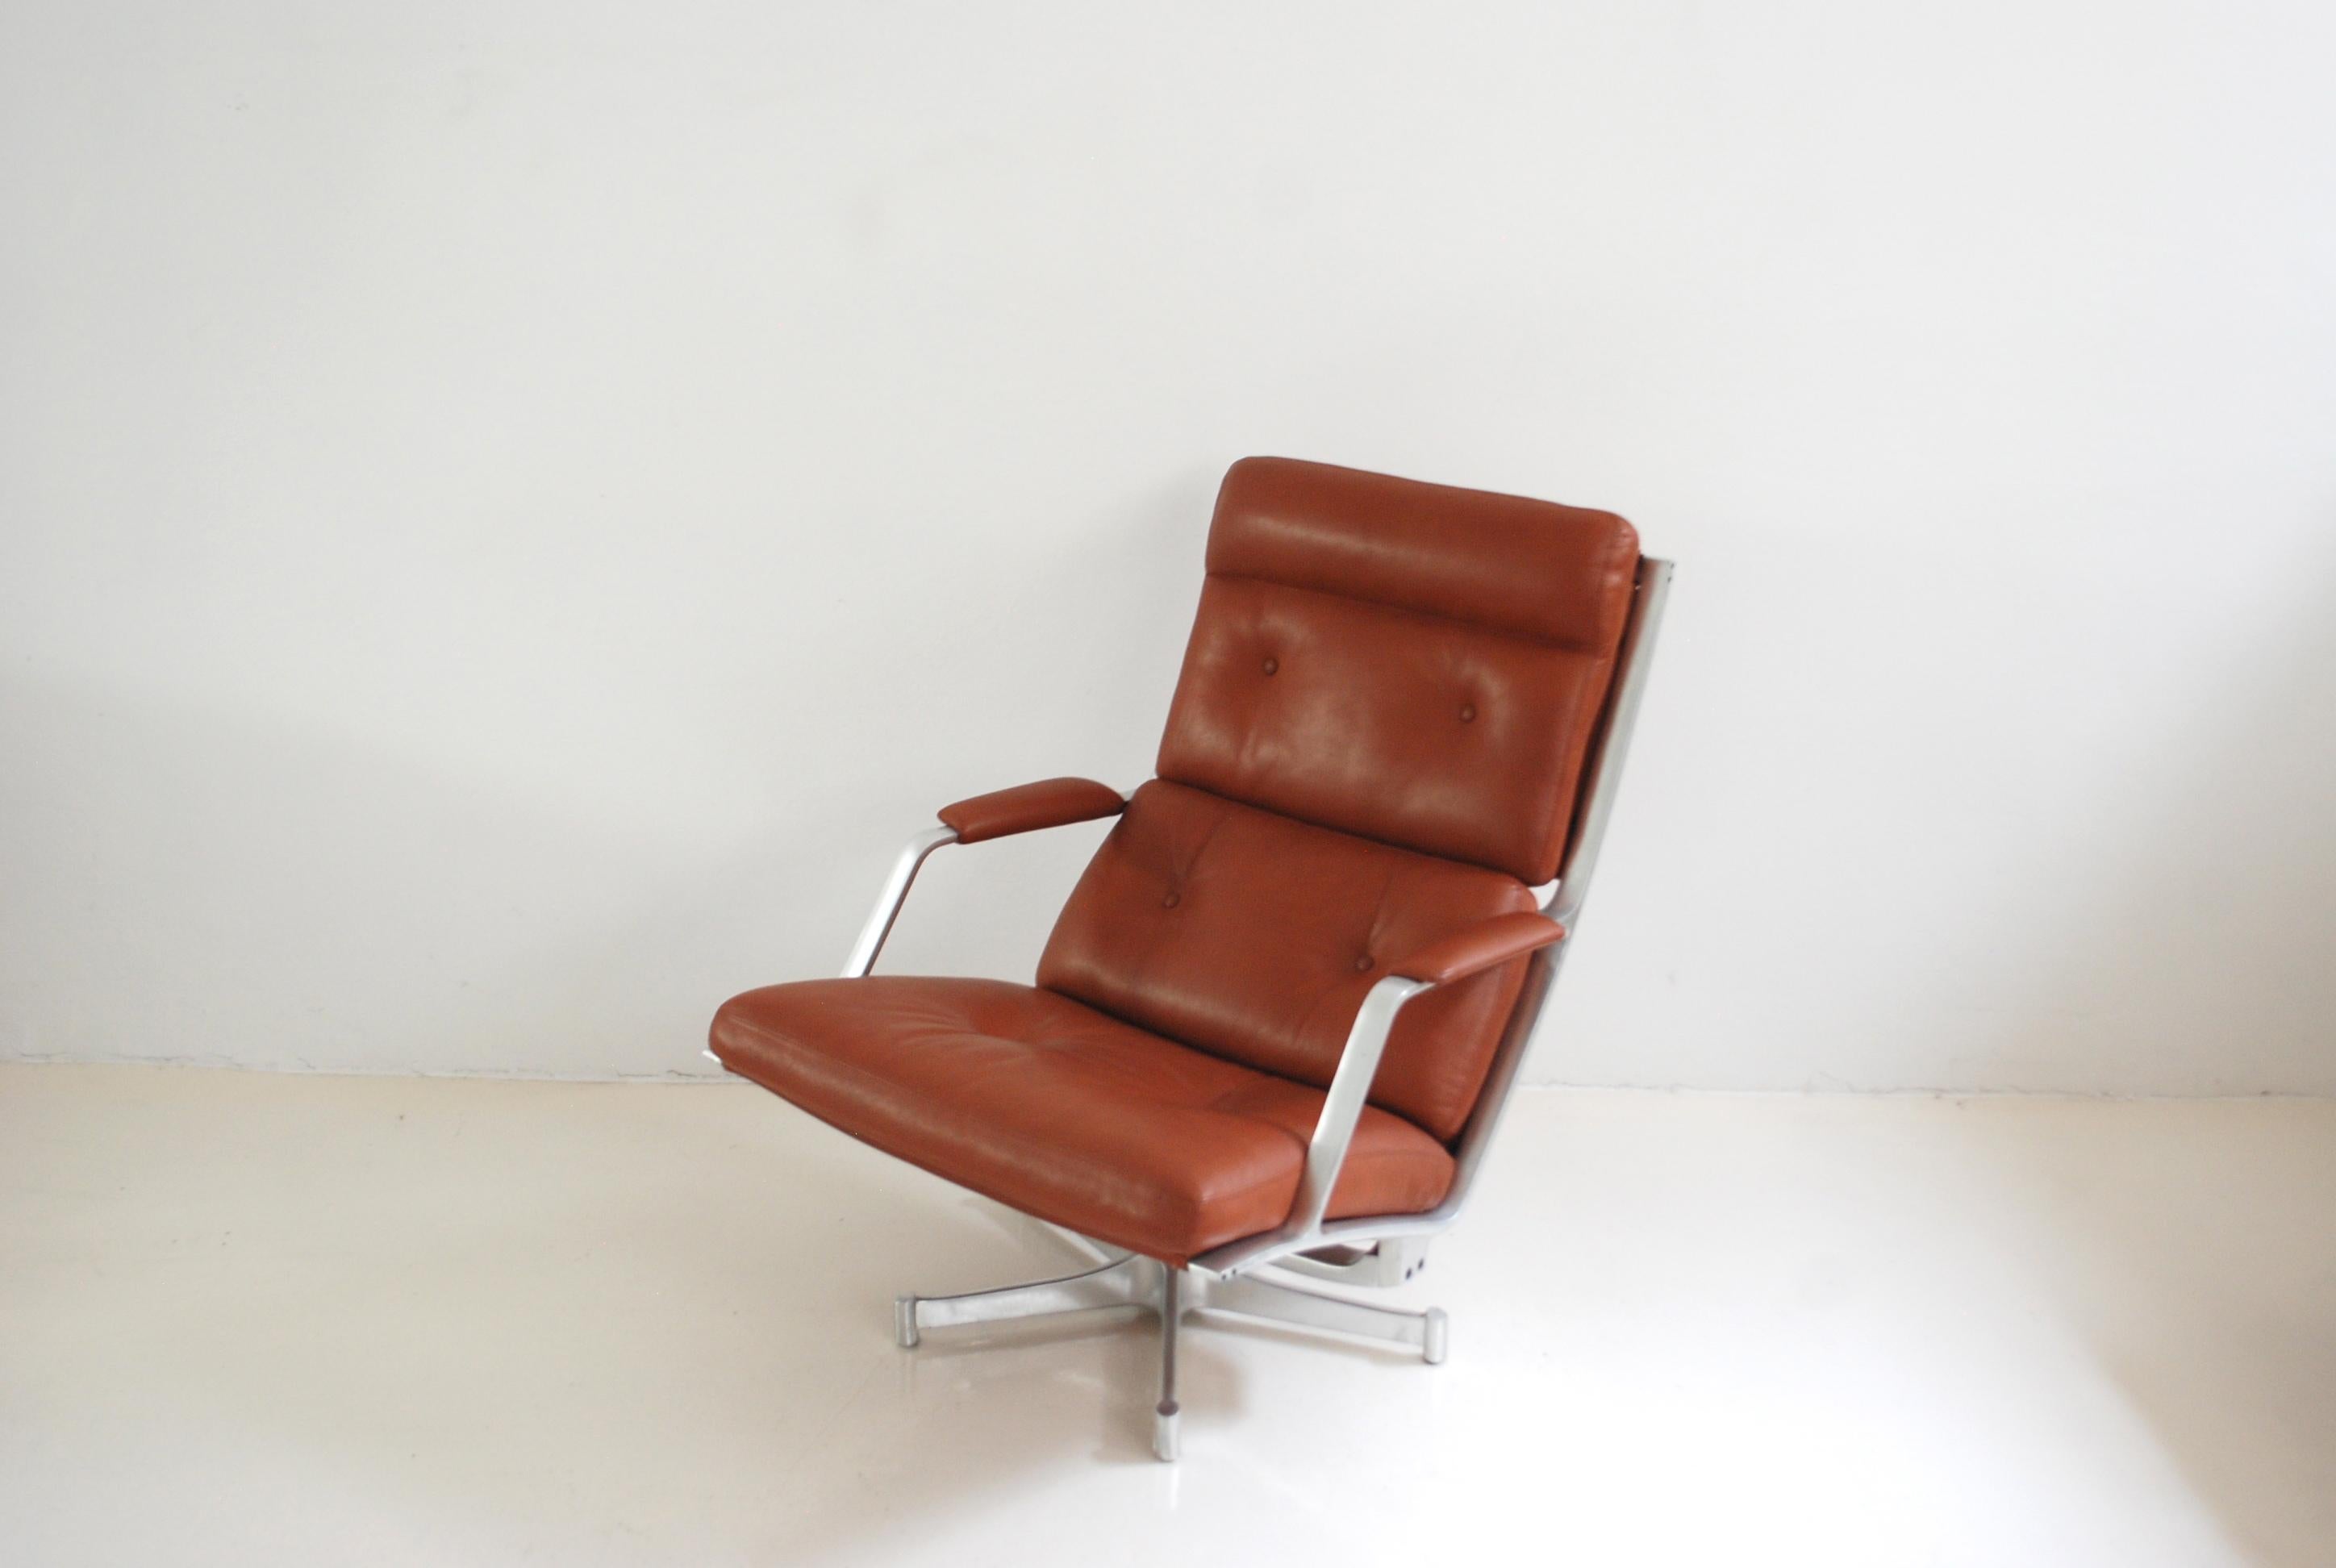 This lounge chair FK 85 was made by Jorgen Kastholm & Preben Fabricius for Kill International.
The lounge chair has a swivel aluminium frame and red cognac leather.
It was new upholstered with aniline leather.
The aluminium frame has some signs